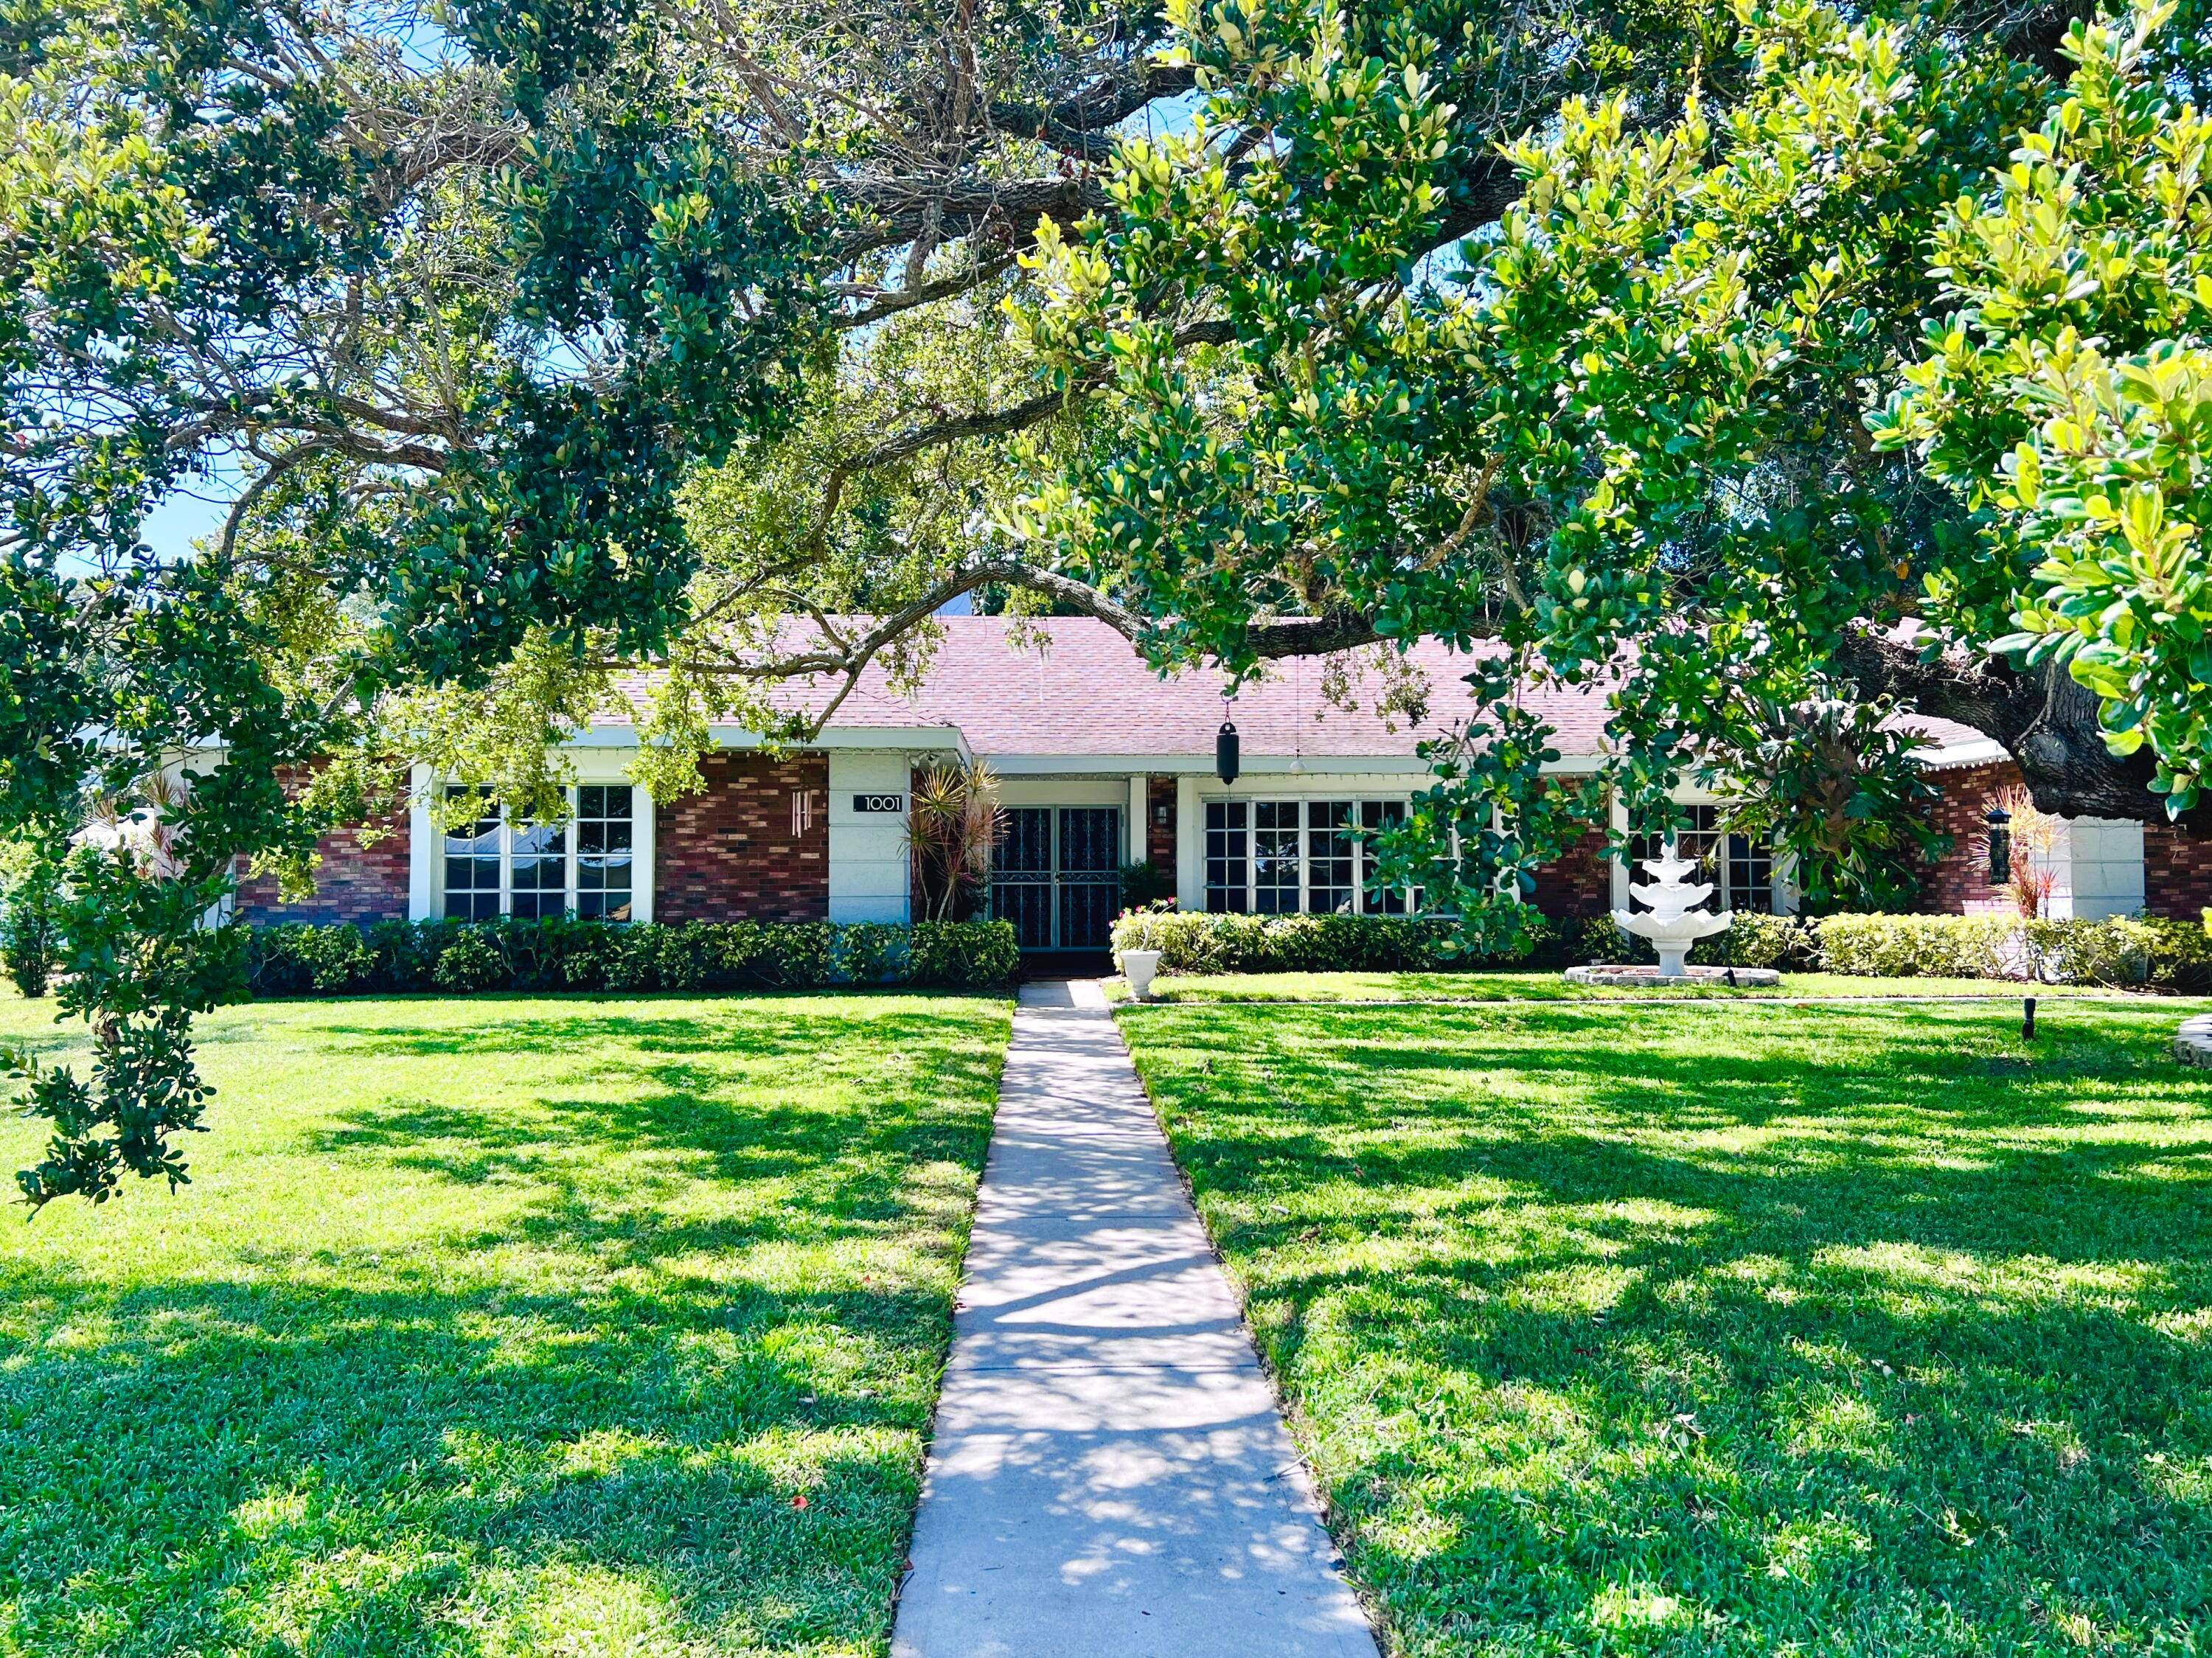 Custom built by a Ft. Pierce business owner in 1984, this home is as solid as the 100 year old heritage Live Oak in the front yard.